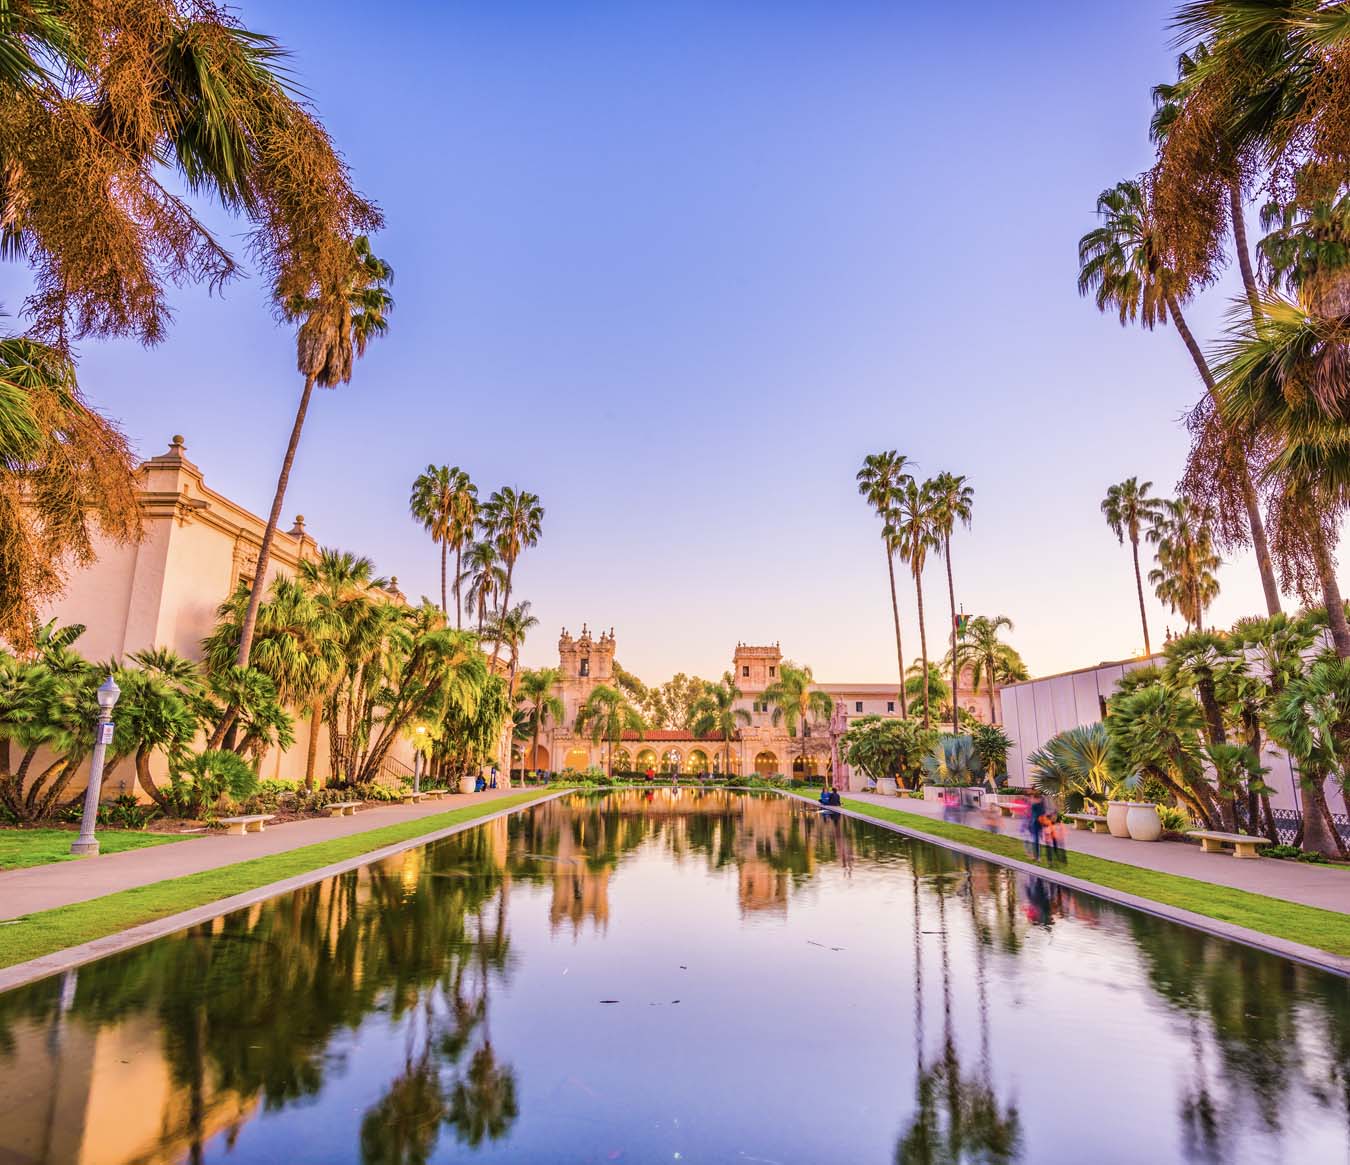 Things to Do in San Diego - Balboa Park